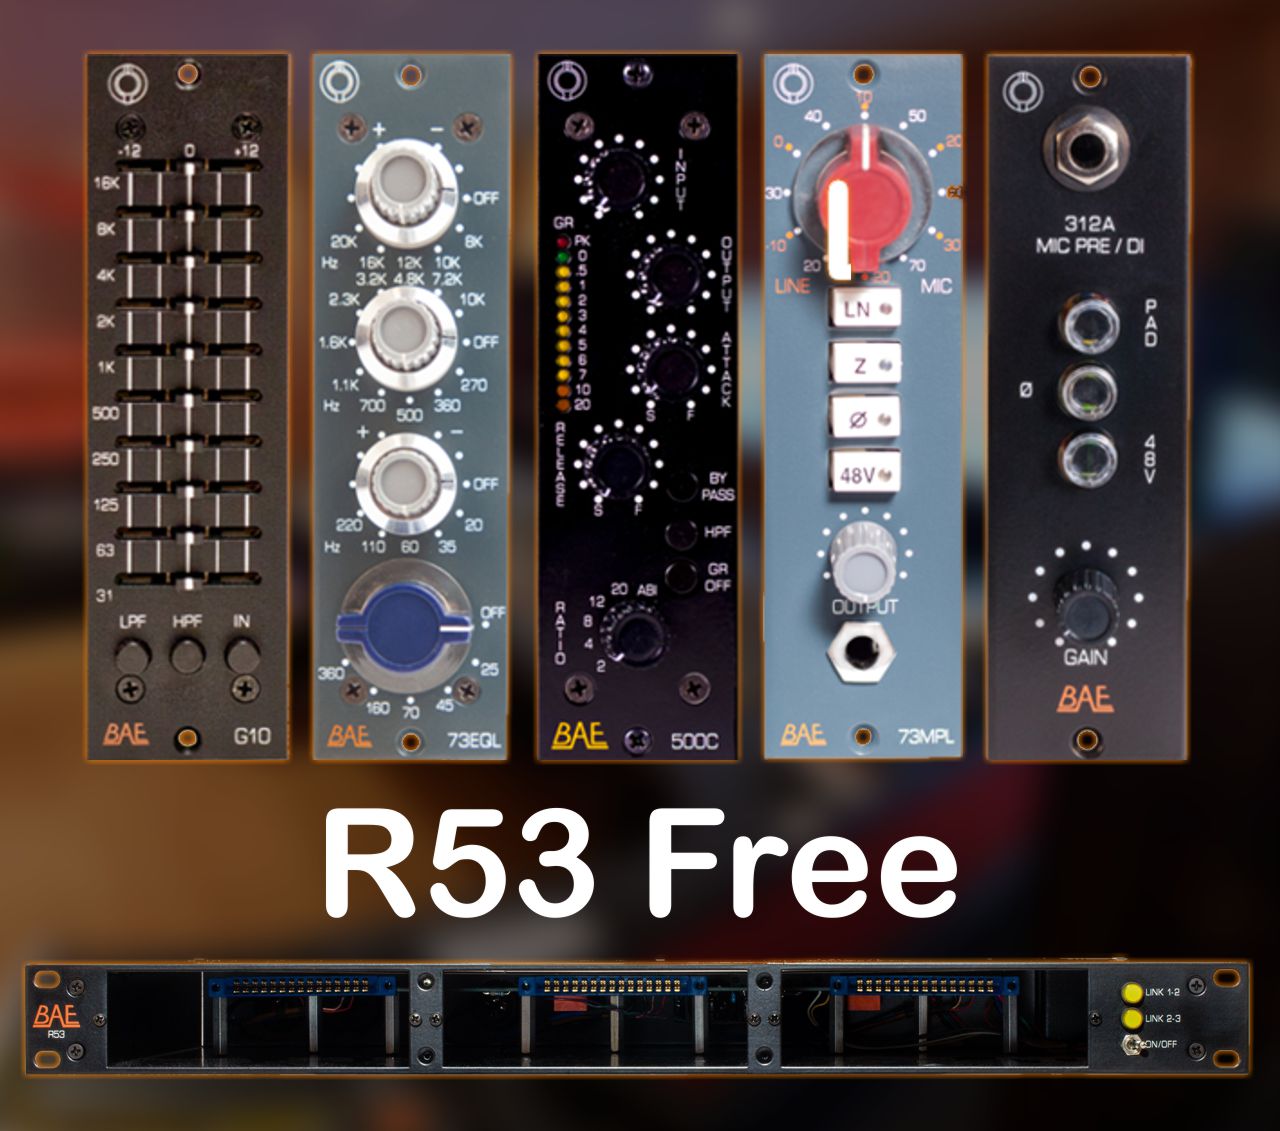 BAE R53 Rack FREE. Special offer!